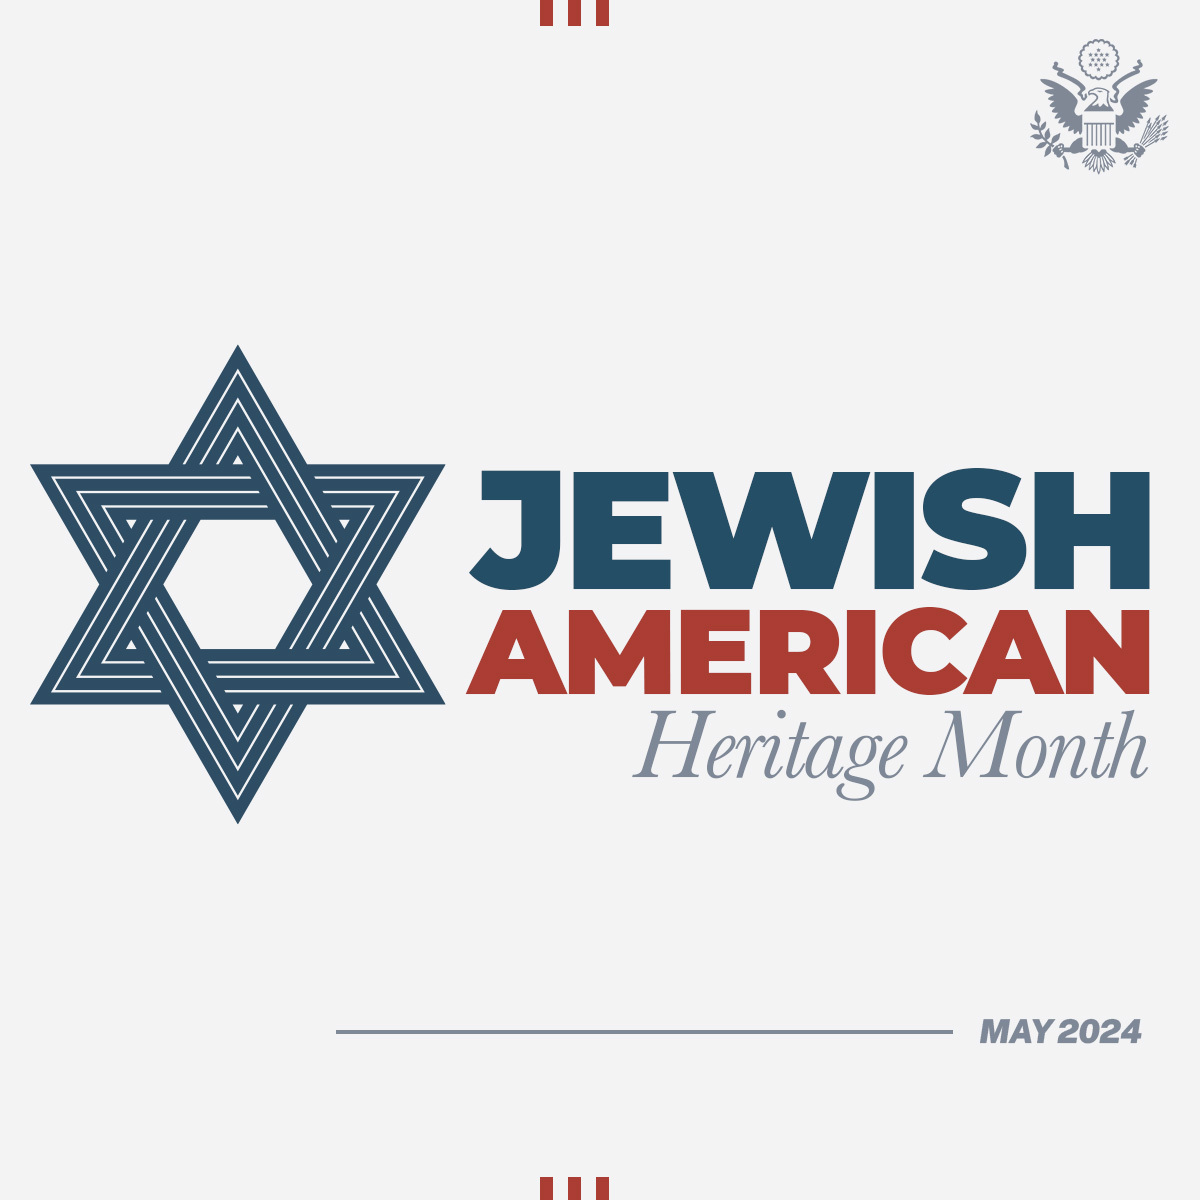 May is #JewishAmericanHeritageMonth, a time to celebrate the contributions and history of the Jewish community in America. We reaffirm our fight against antisemitism at home and around the world.